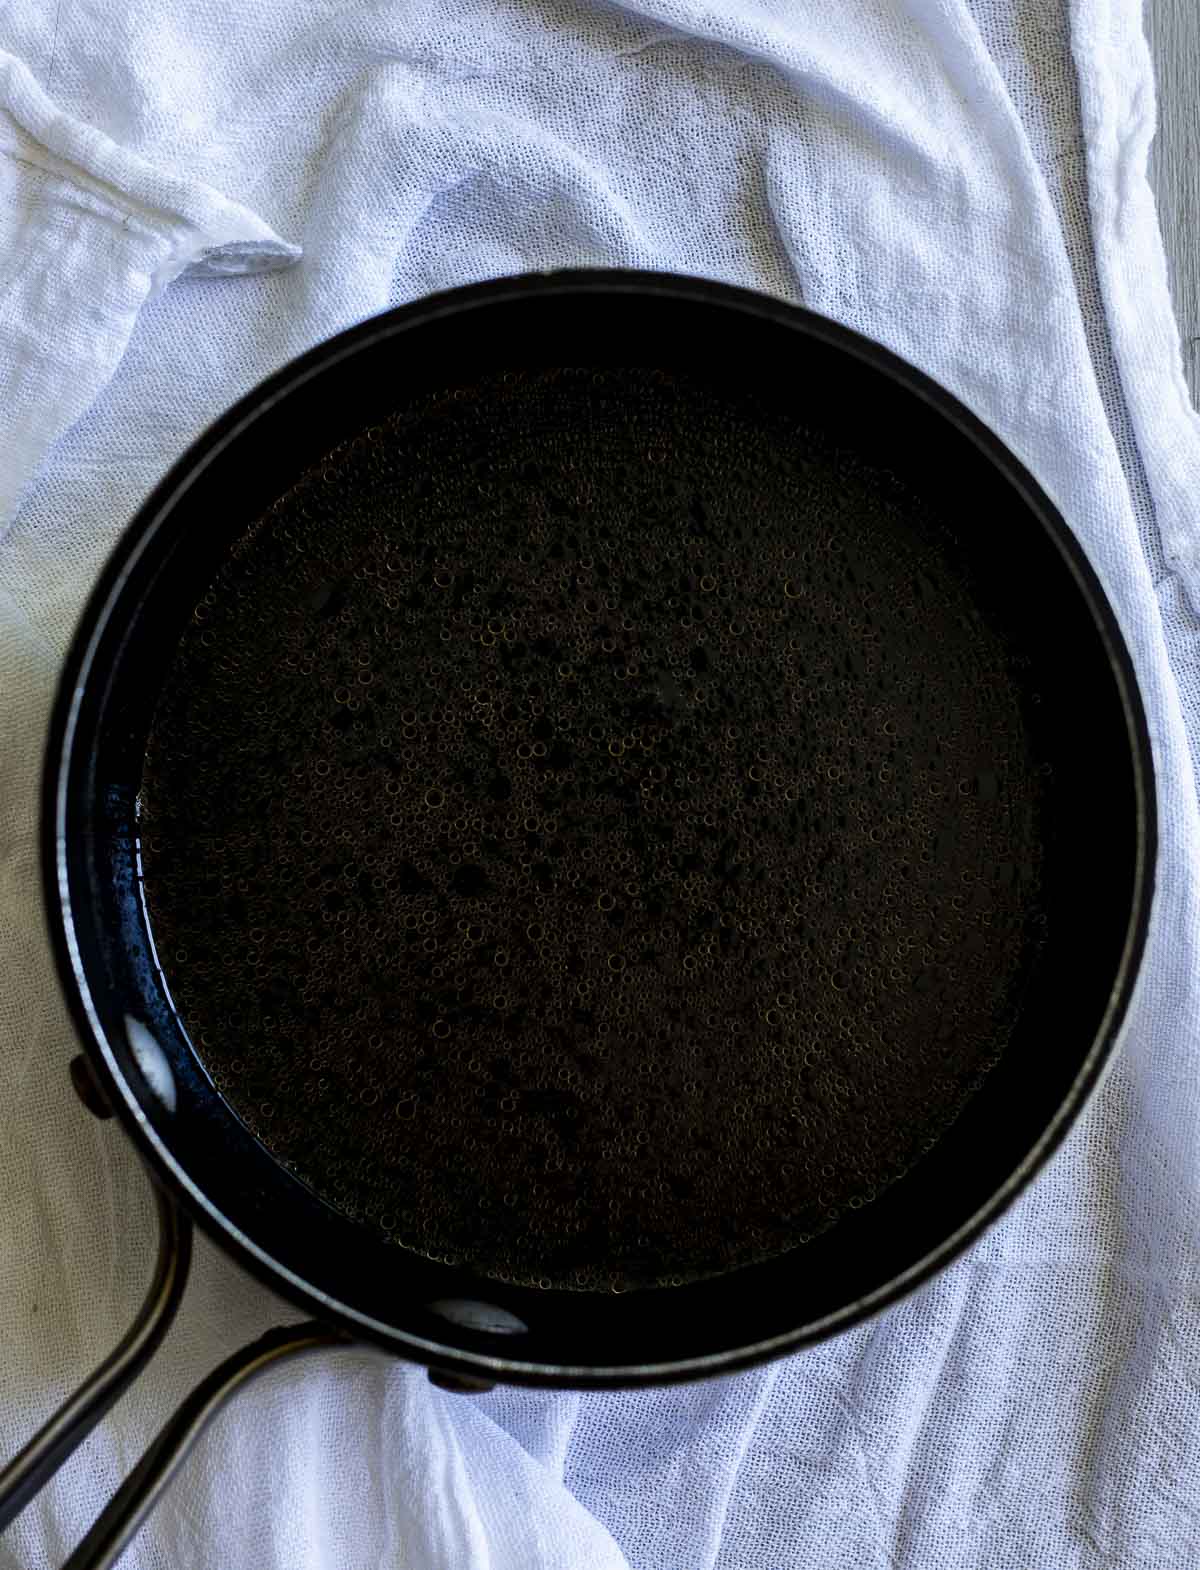 Sesame sauce mixed together in a saucepan.